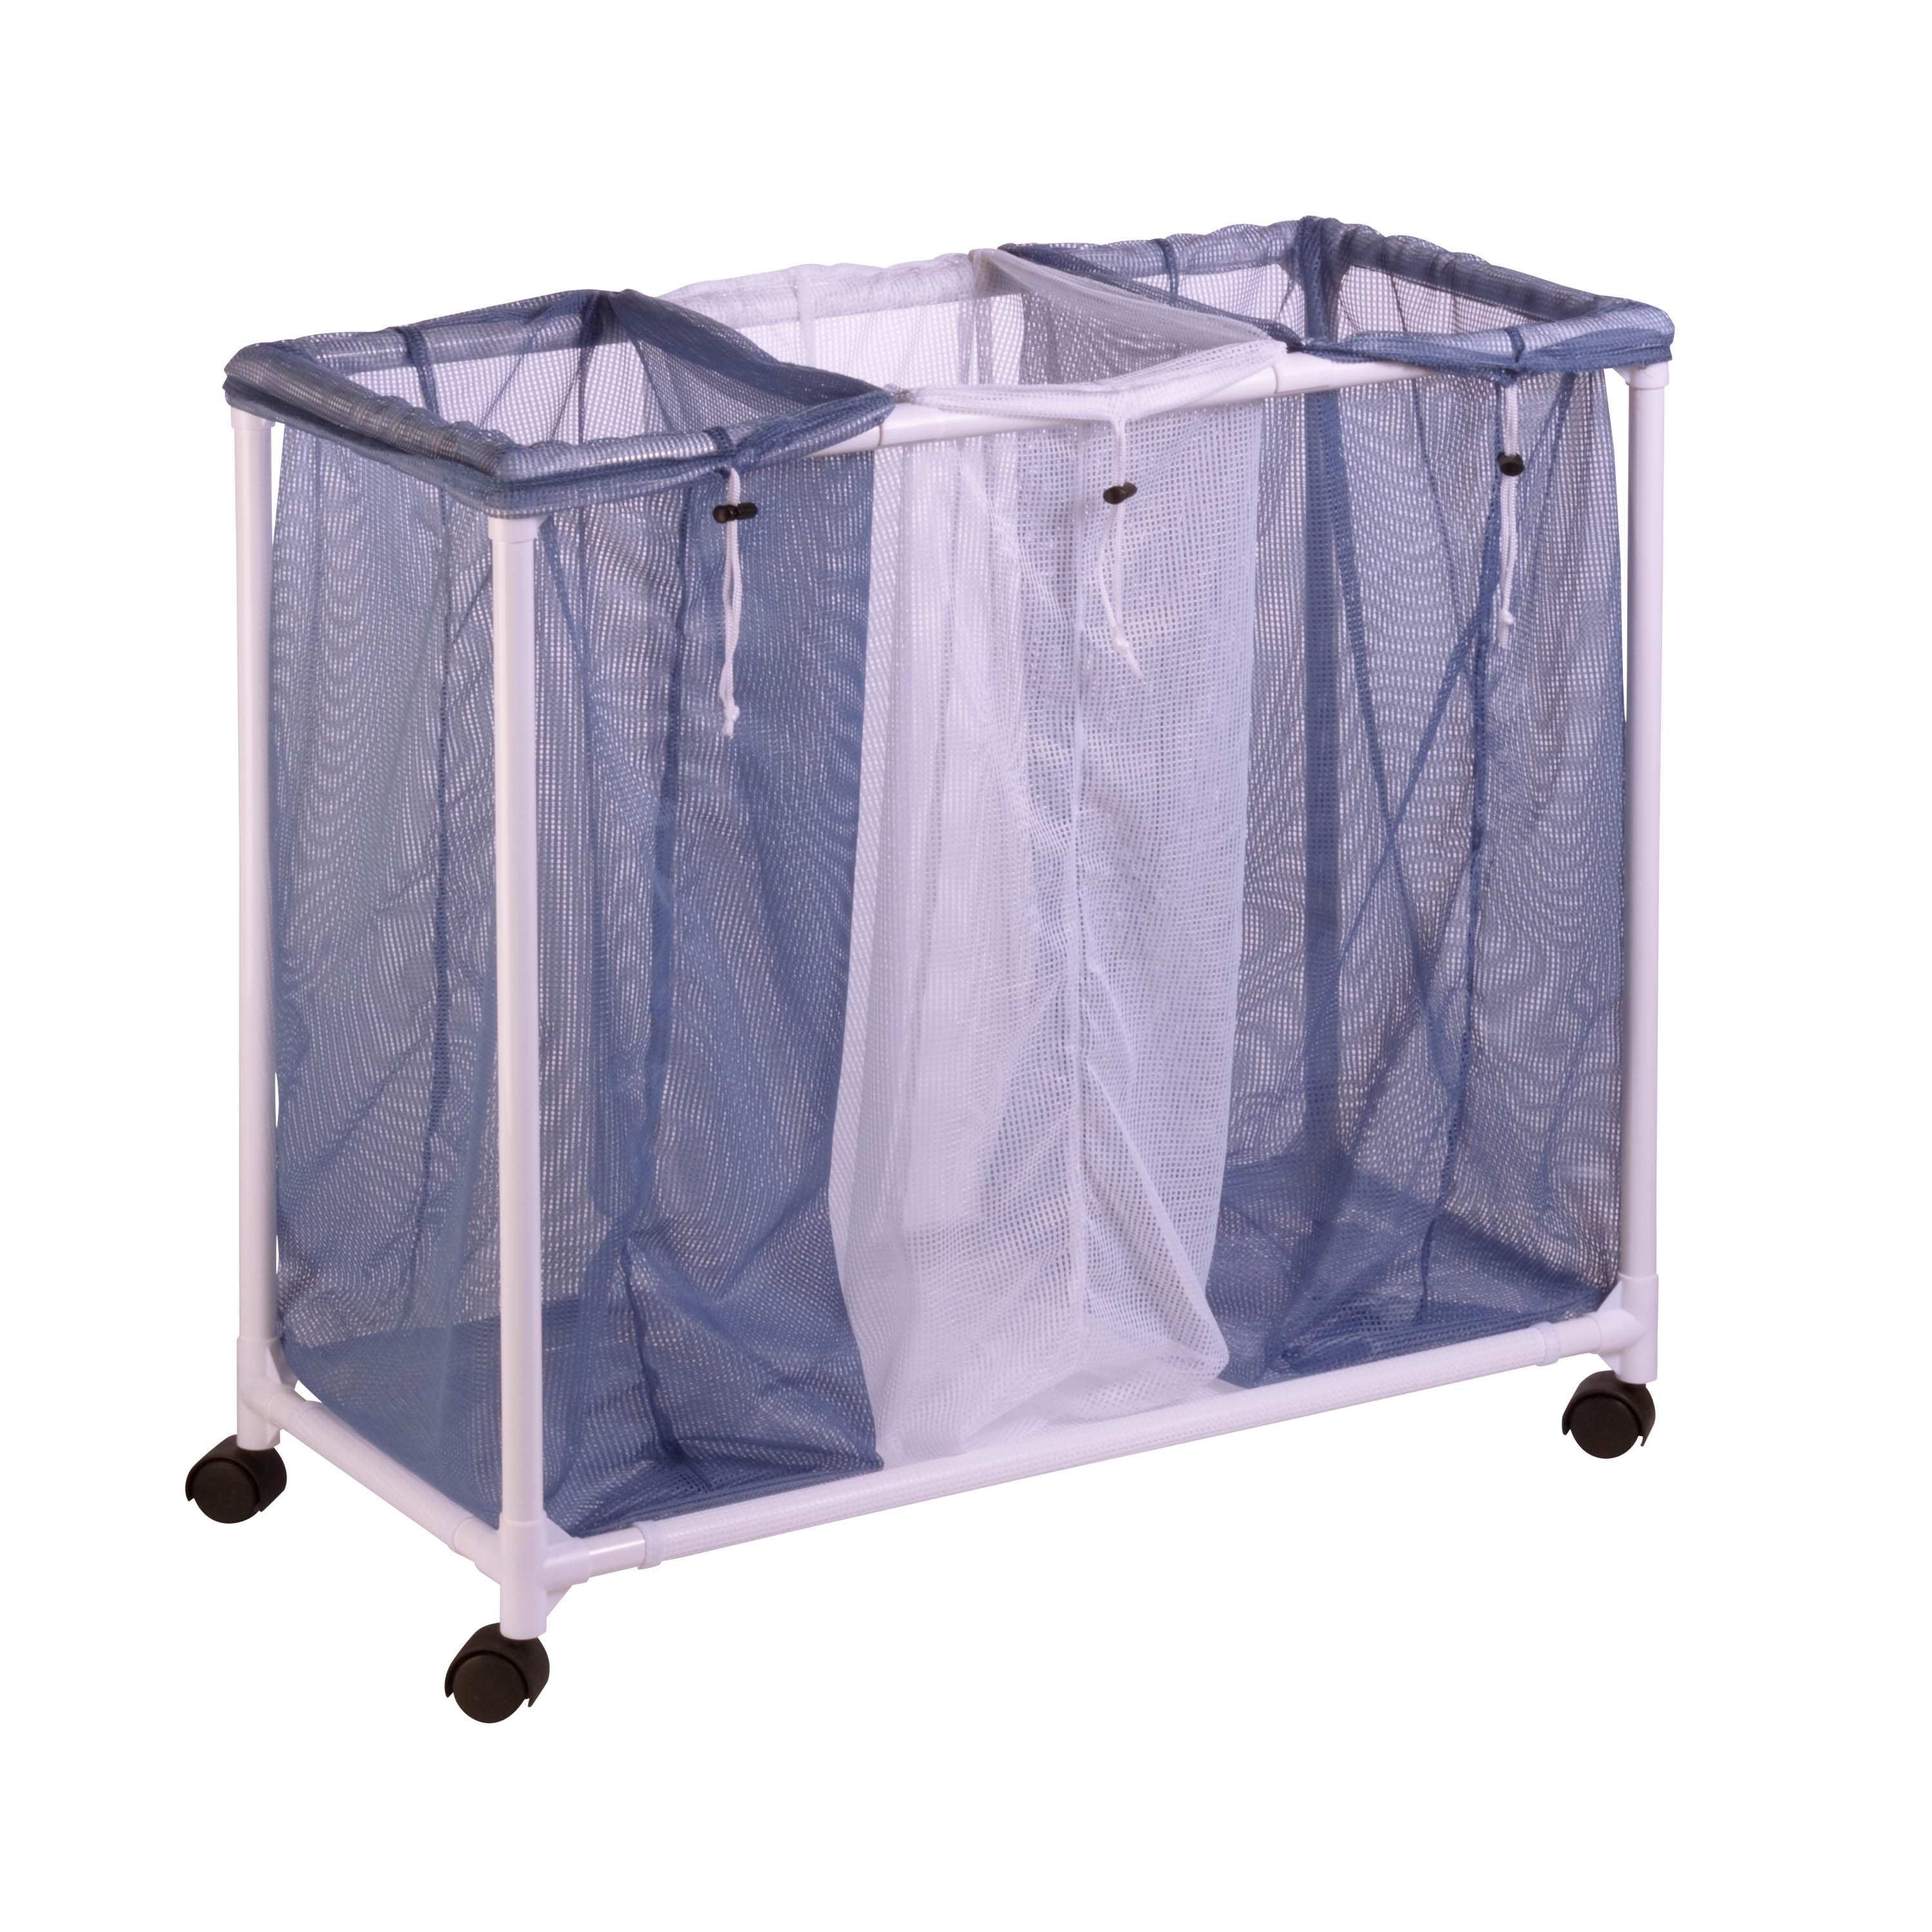 Honey-Can-Do Plastic 3-Compartment Polyester Mesh Rolling Laundry Sorter, Blue and White - image 1 of 3